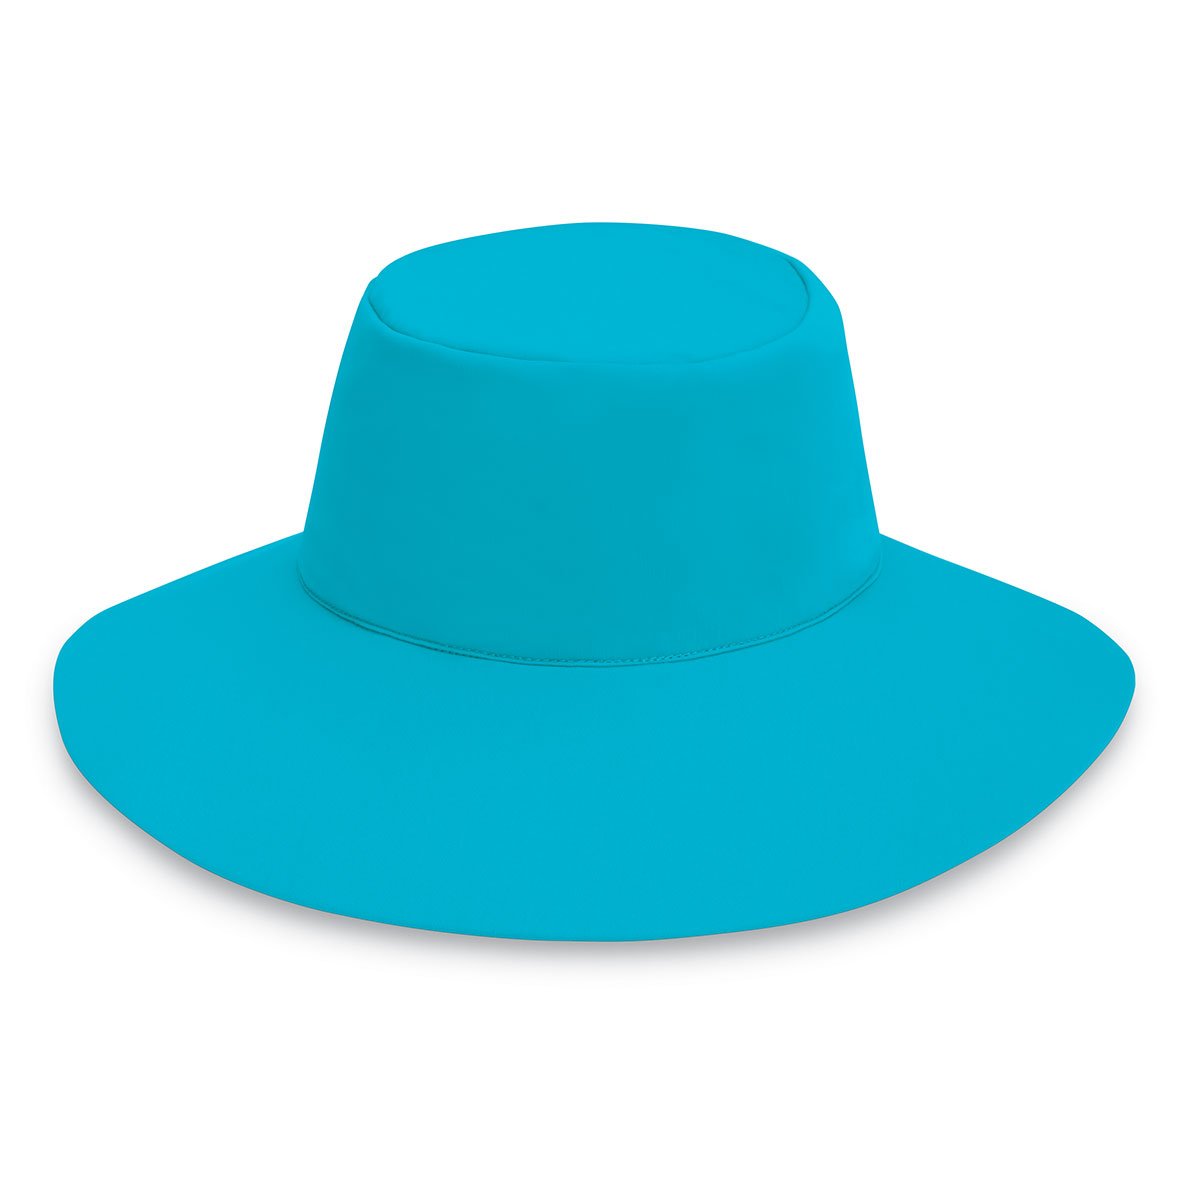 Featuring Women's Packable UPF Aqua Hat Beach Sun Hat with Chinstrap in Turquoise from Wallaroo